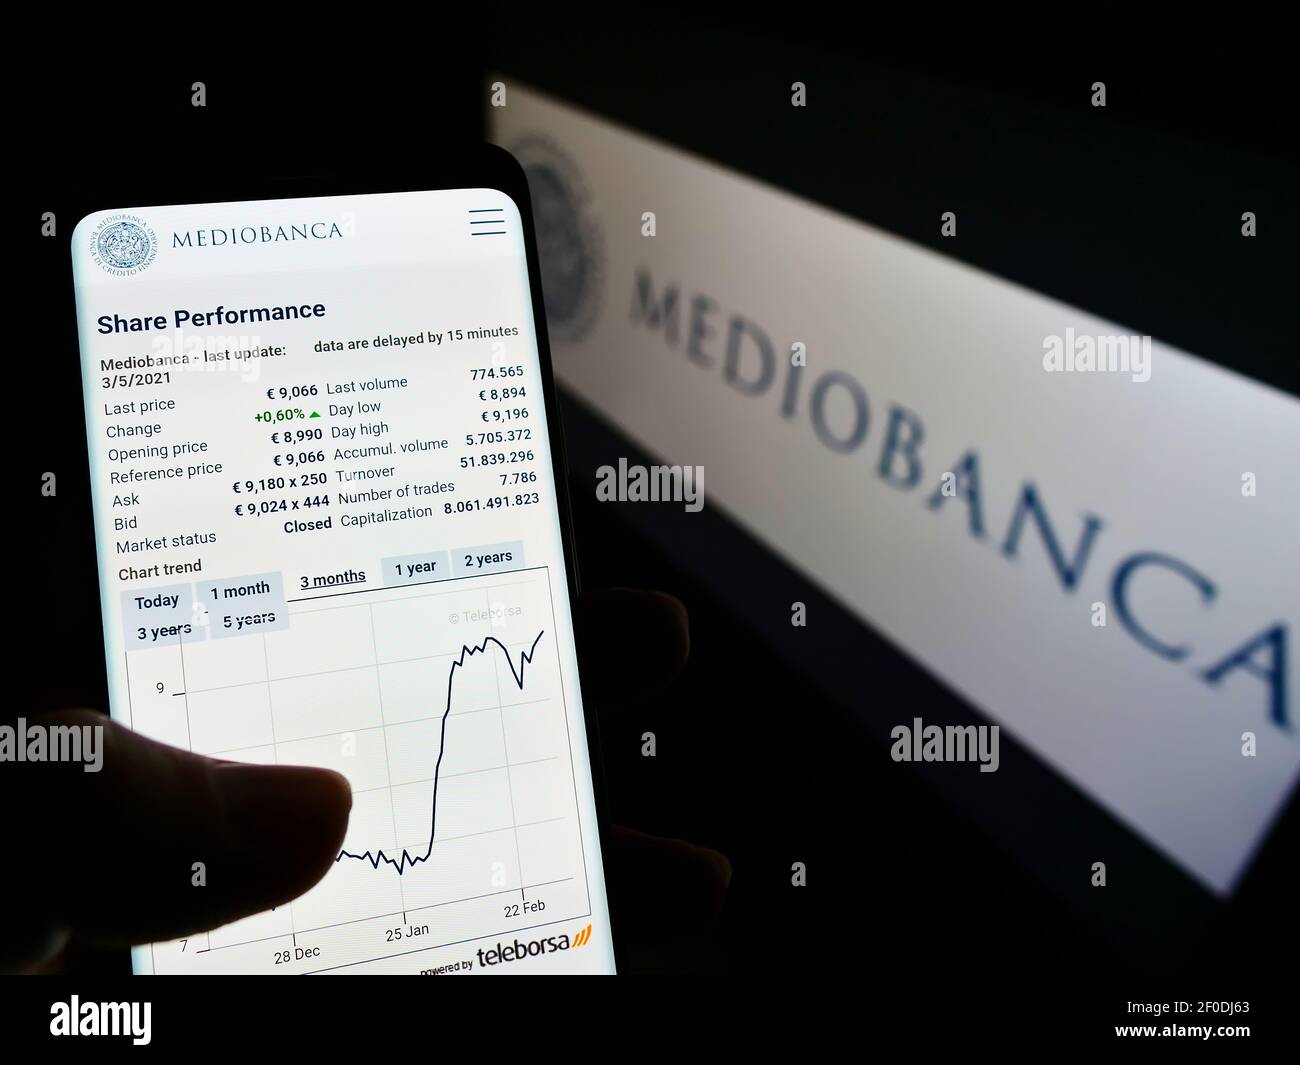 Person holding mobile phone with webpage and stock chart of Italian bank Mediobanca on screen in front of logo. Focus on center of phone display. Stock Photo